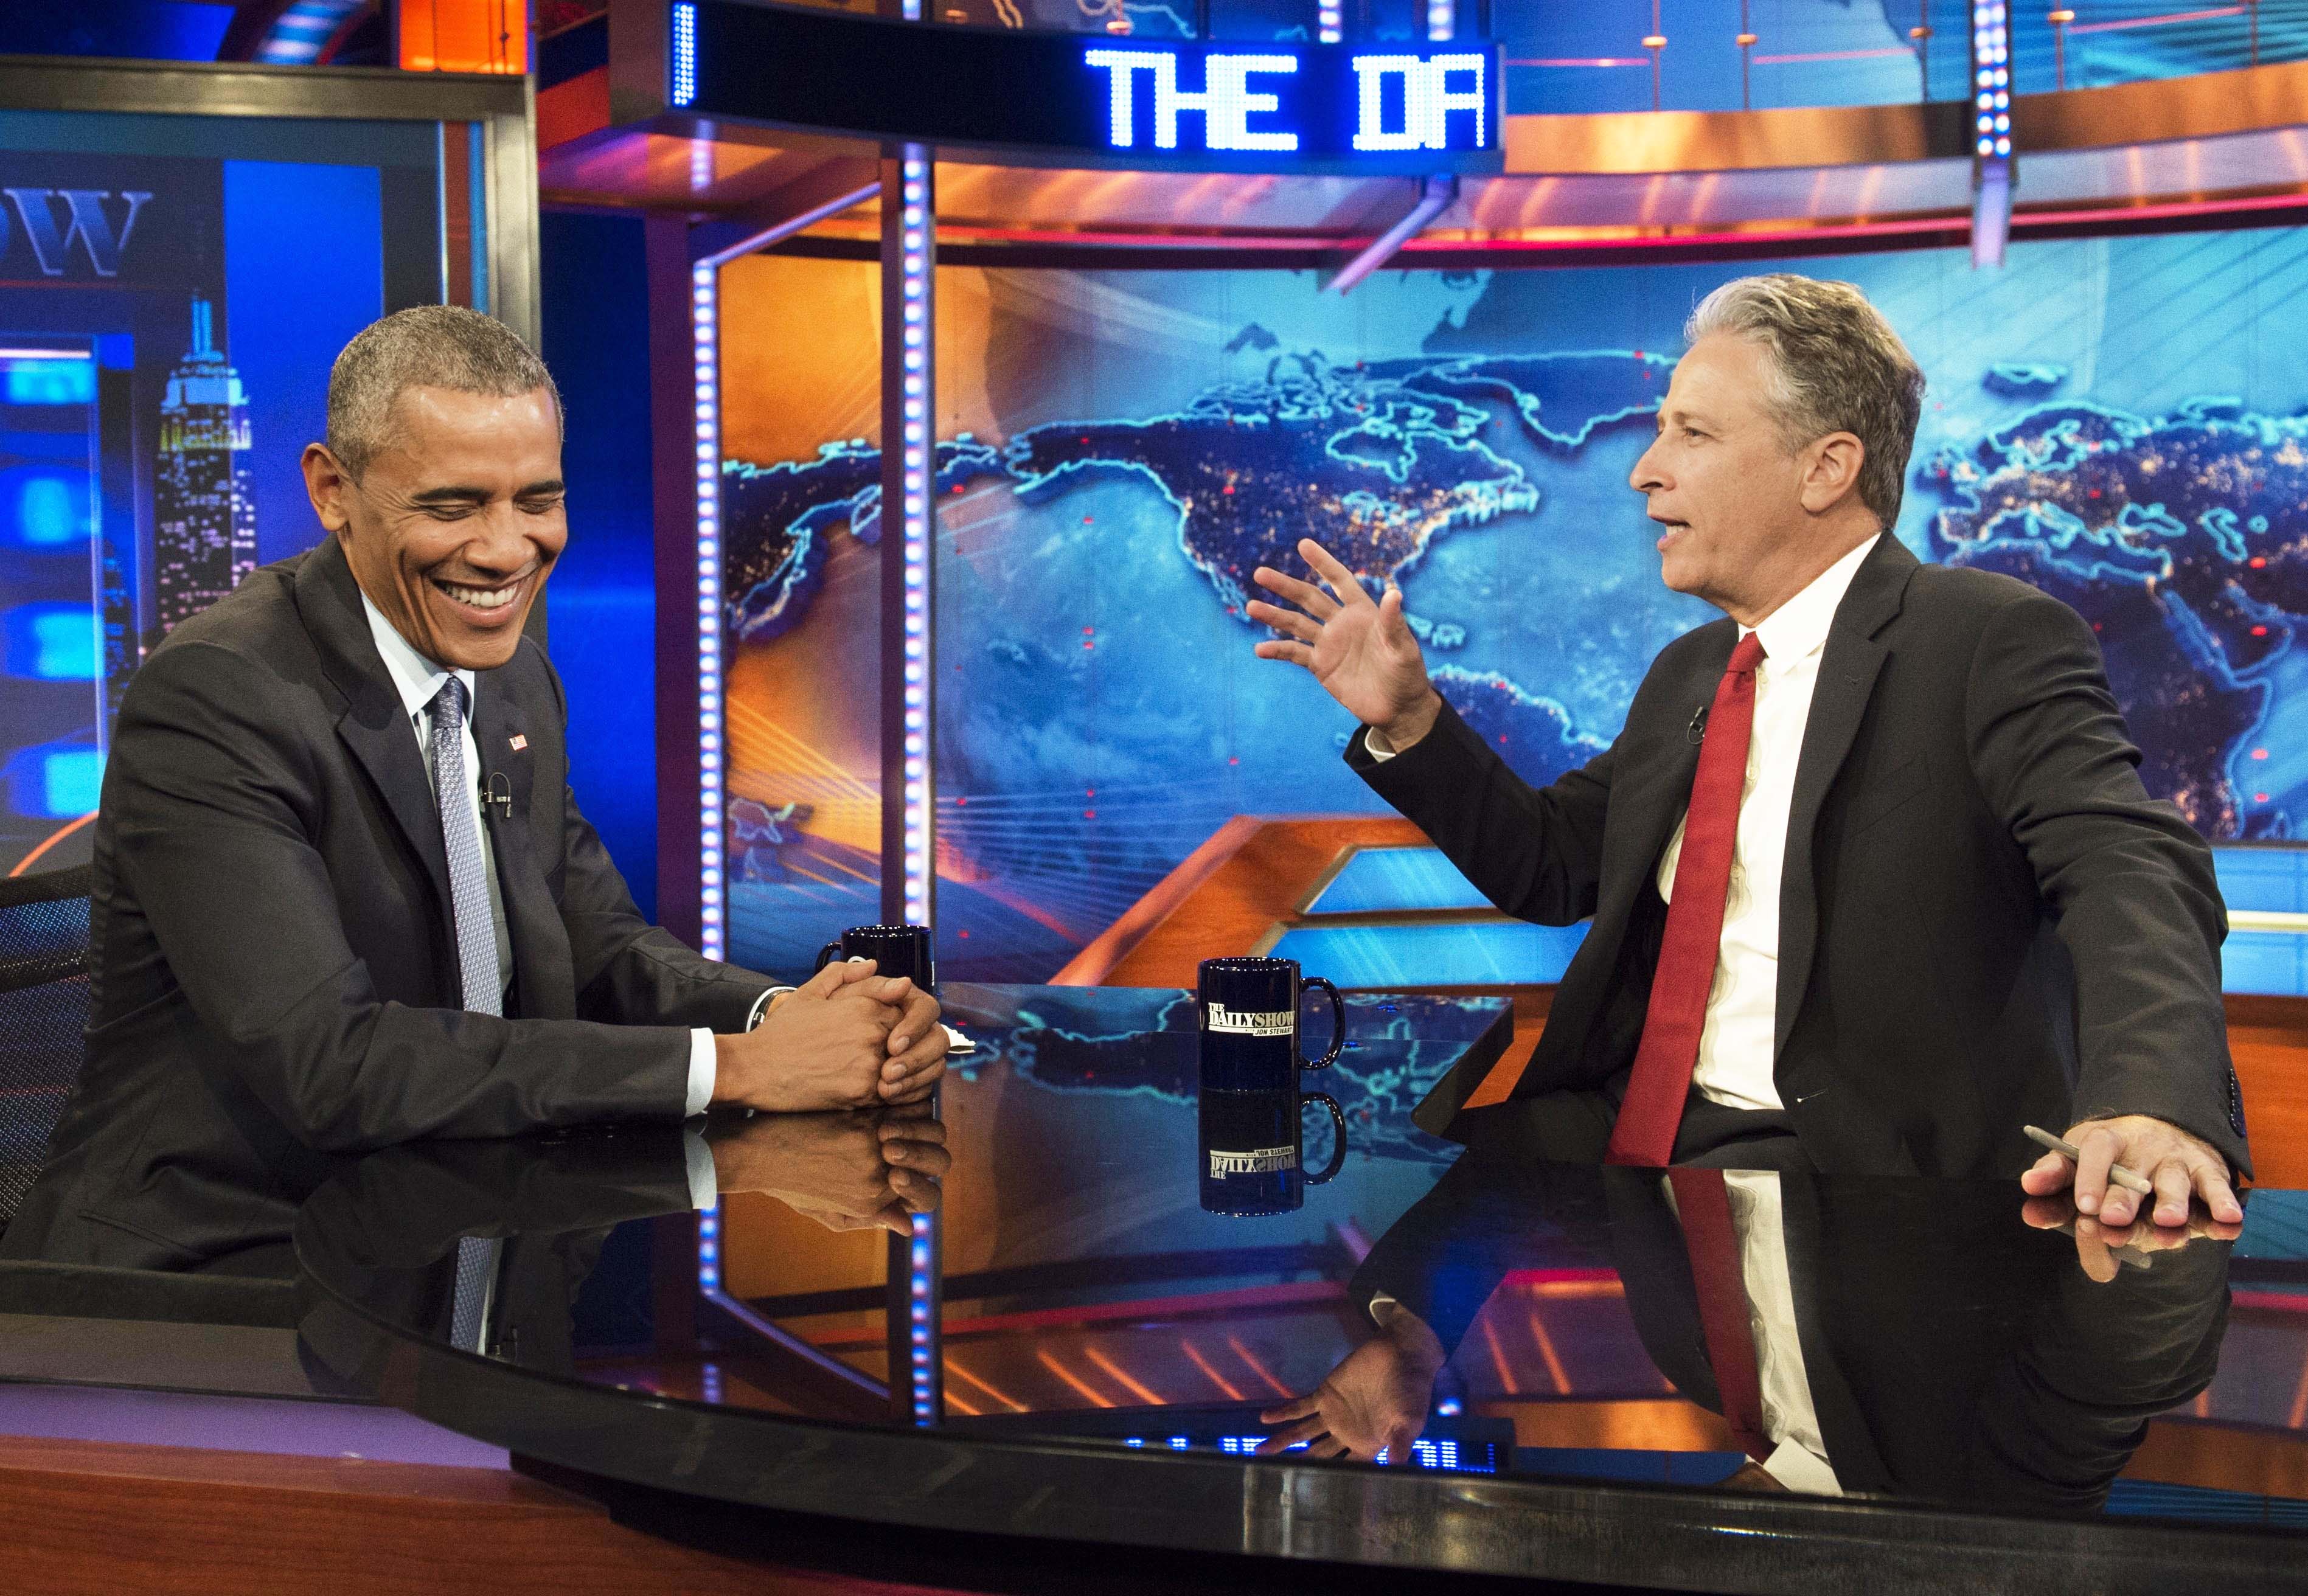 President Obama made his seventh Daily Show appearance the week before Stewart signed off. (Saul Loeb—Getty Images)